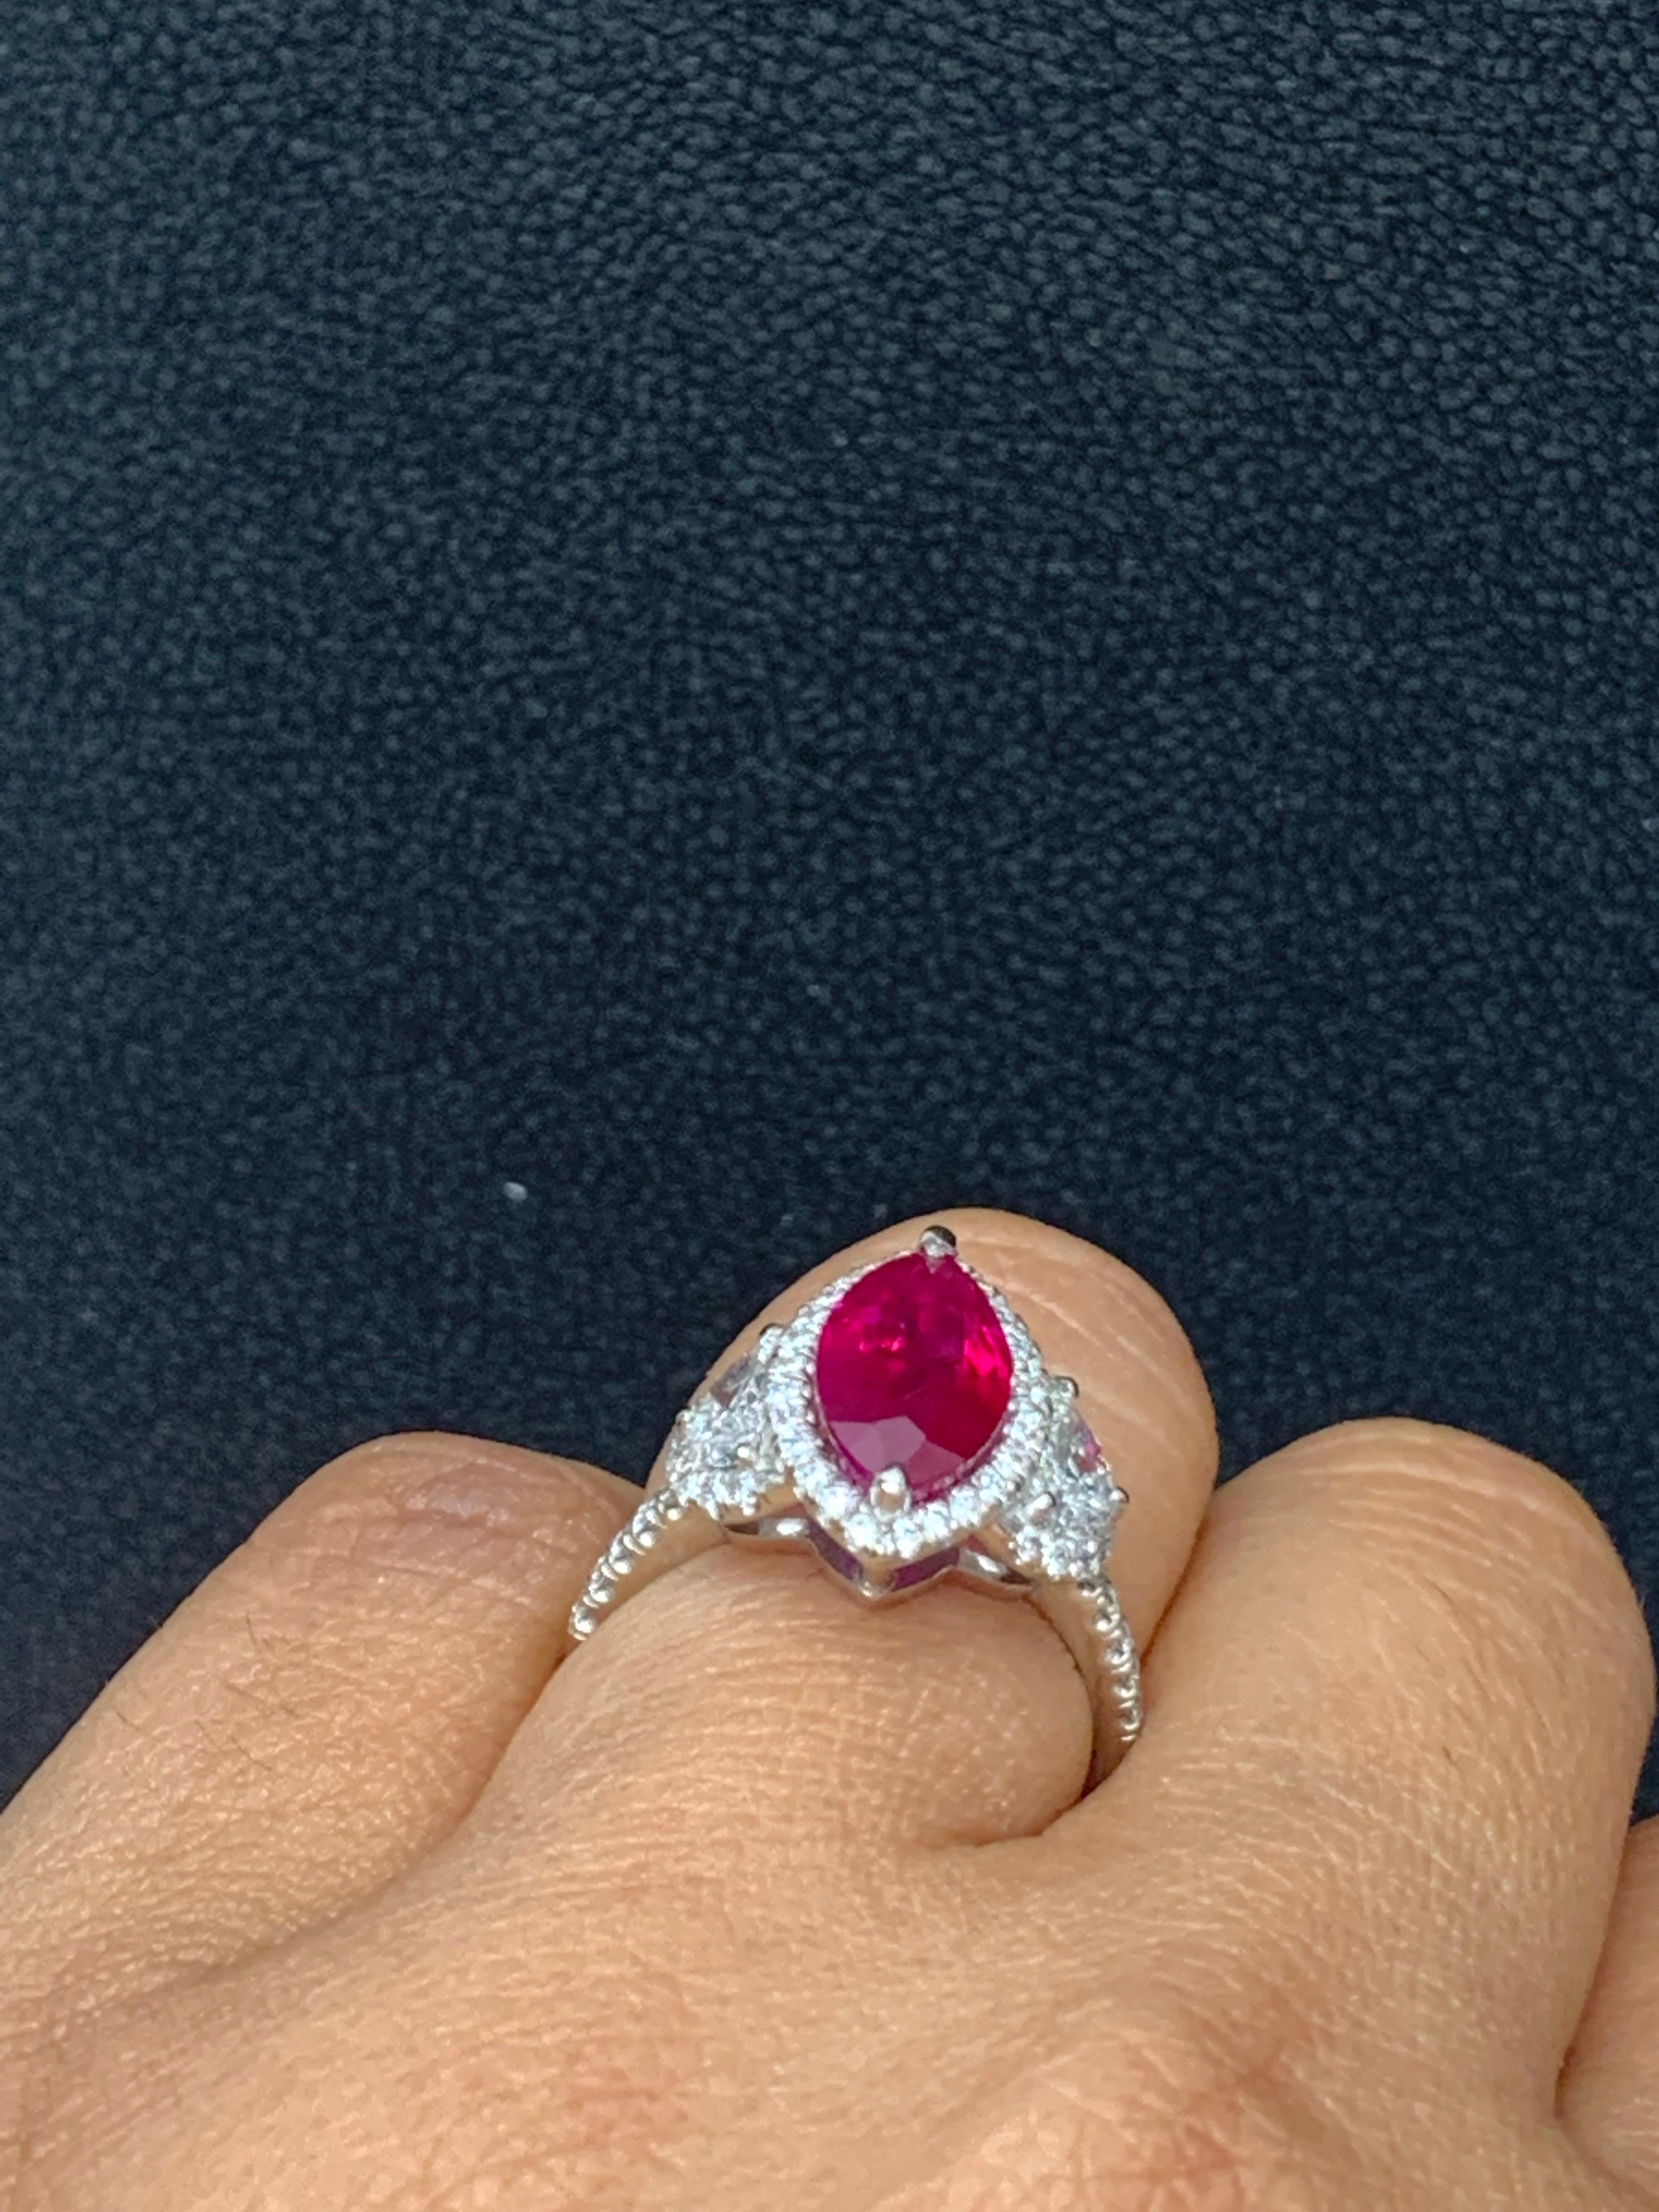 Certified 3.01 Carat Marquise Cut Burma Ruby Diamond 3 Stone Halo Ring Platinum For Sale 10